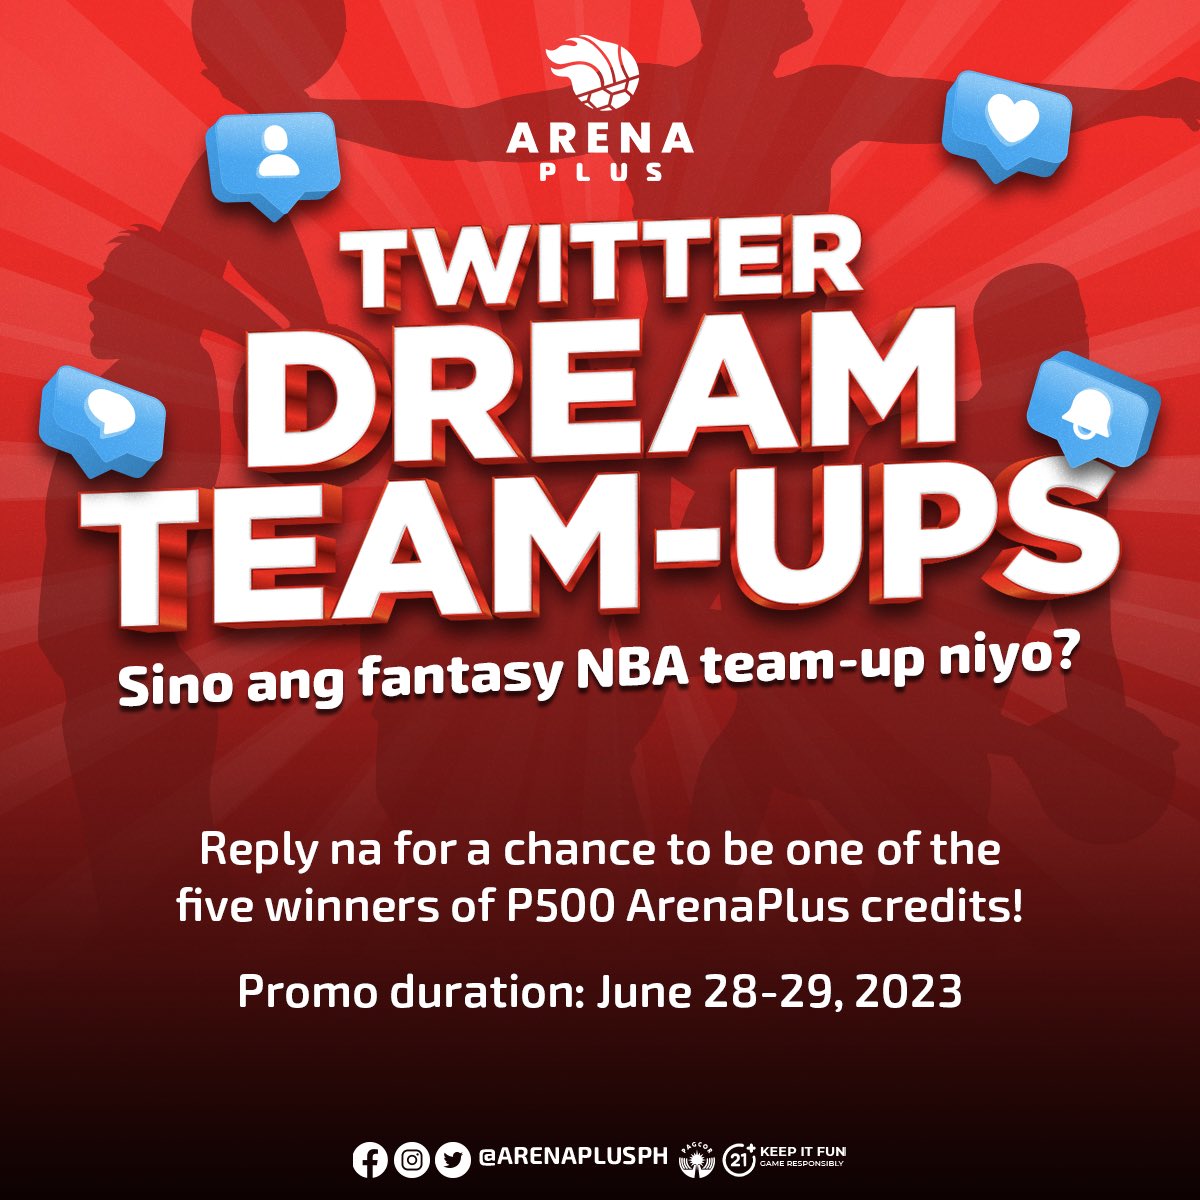 Imagine MJ and LeBron playing on the same team. Kayo, sino ang dream NBA pairing niyo? Reply na for a chance to be one of the five winners of P500 ArenaPlus credits! 🥰

Promo duration: June 28-29, 2023 

#ArenaPlusPH #AstigSaSports #TwitterDreamTeamUps